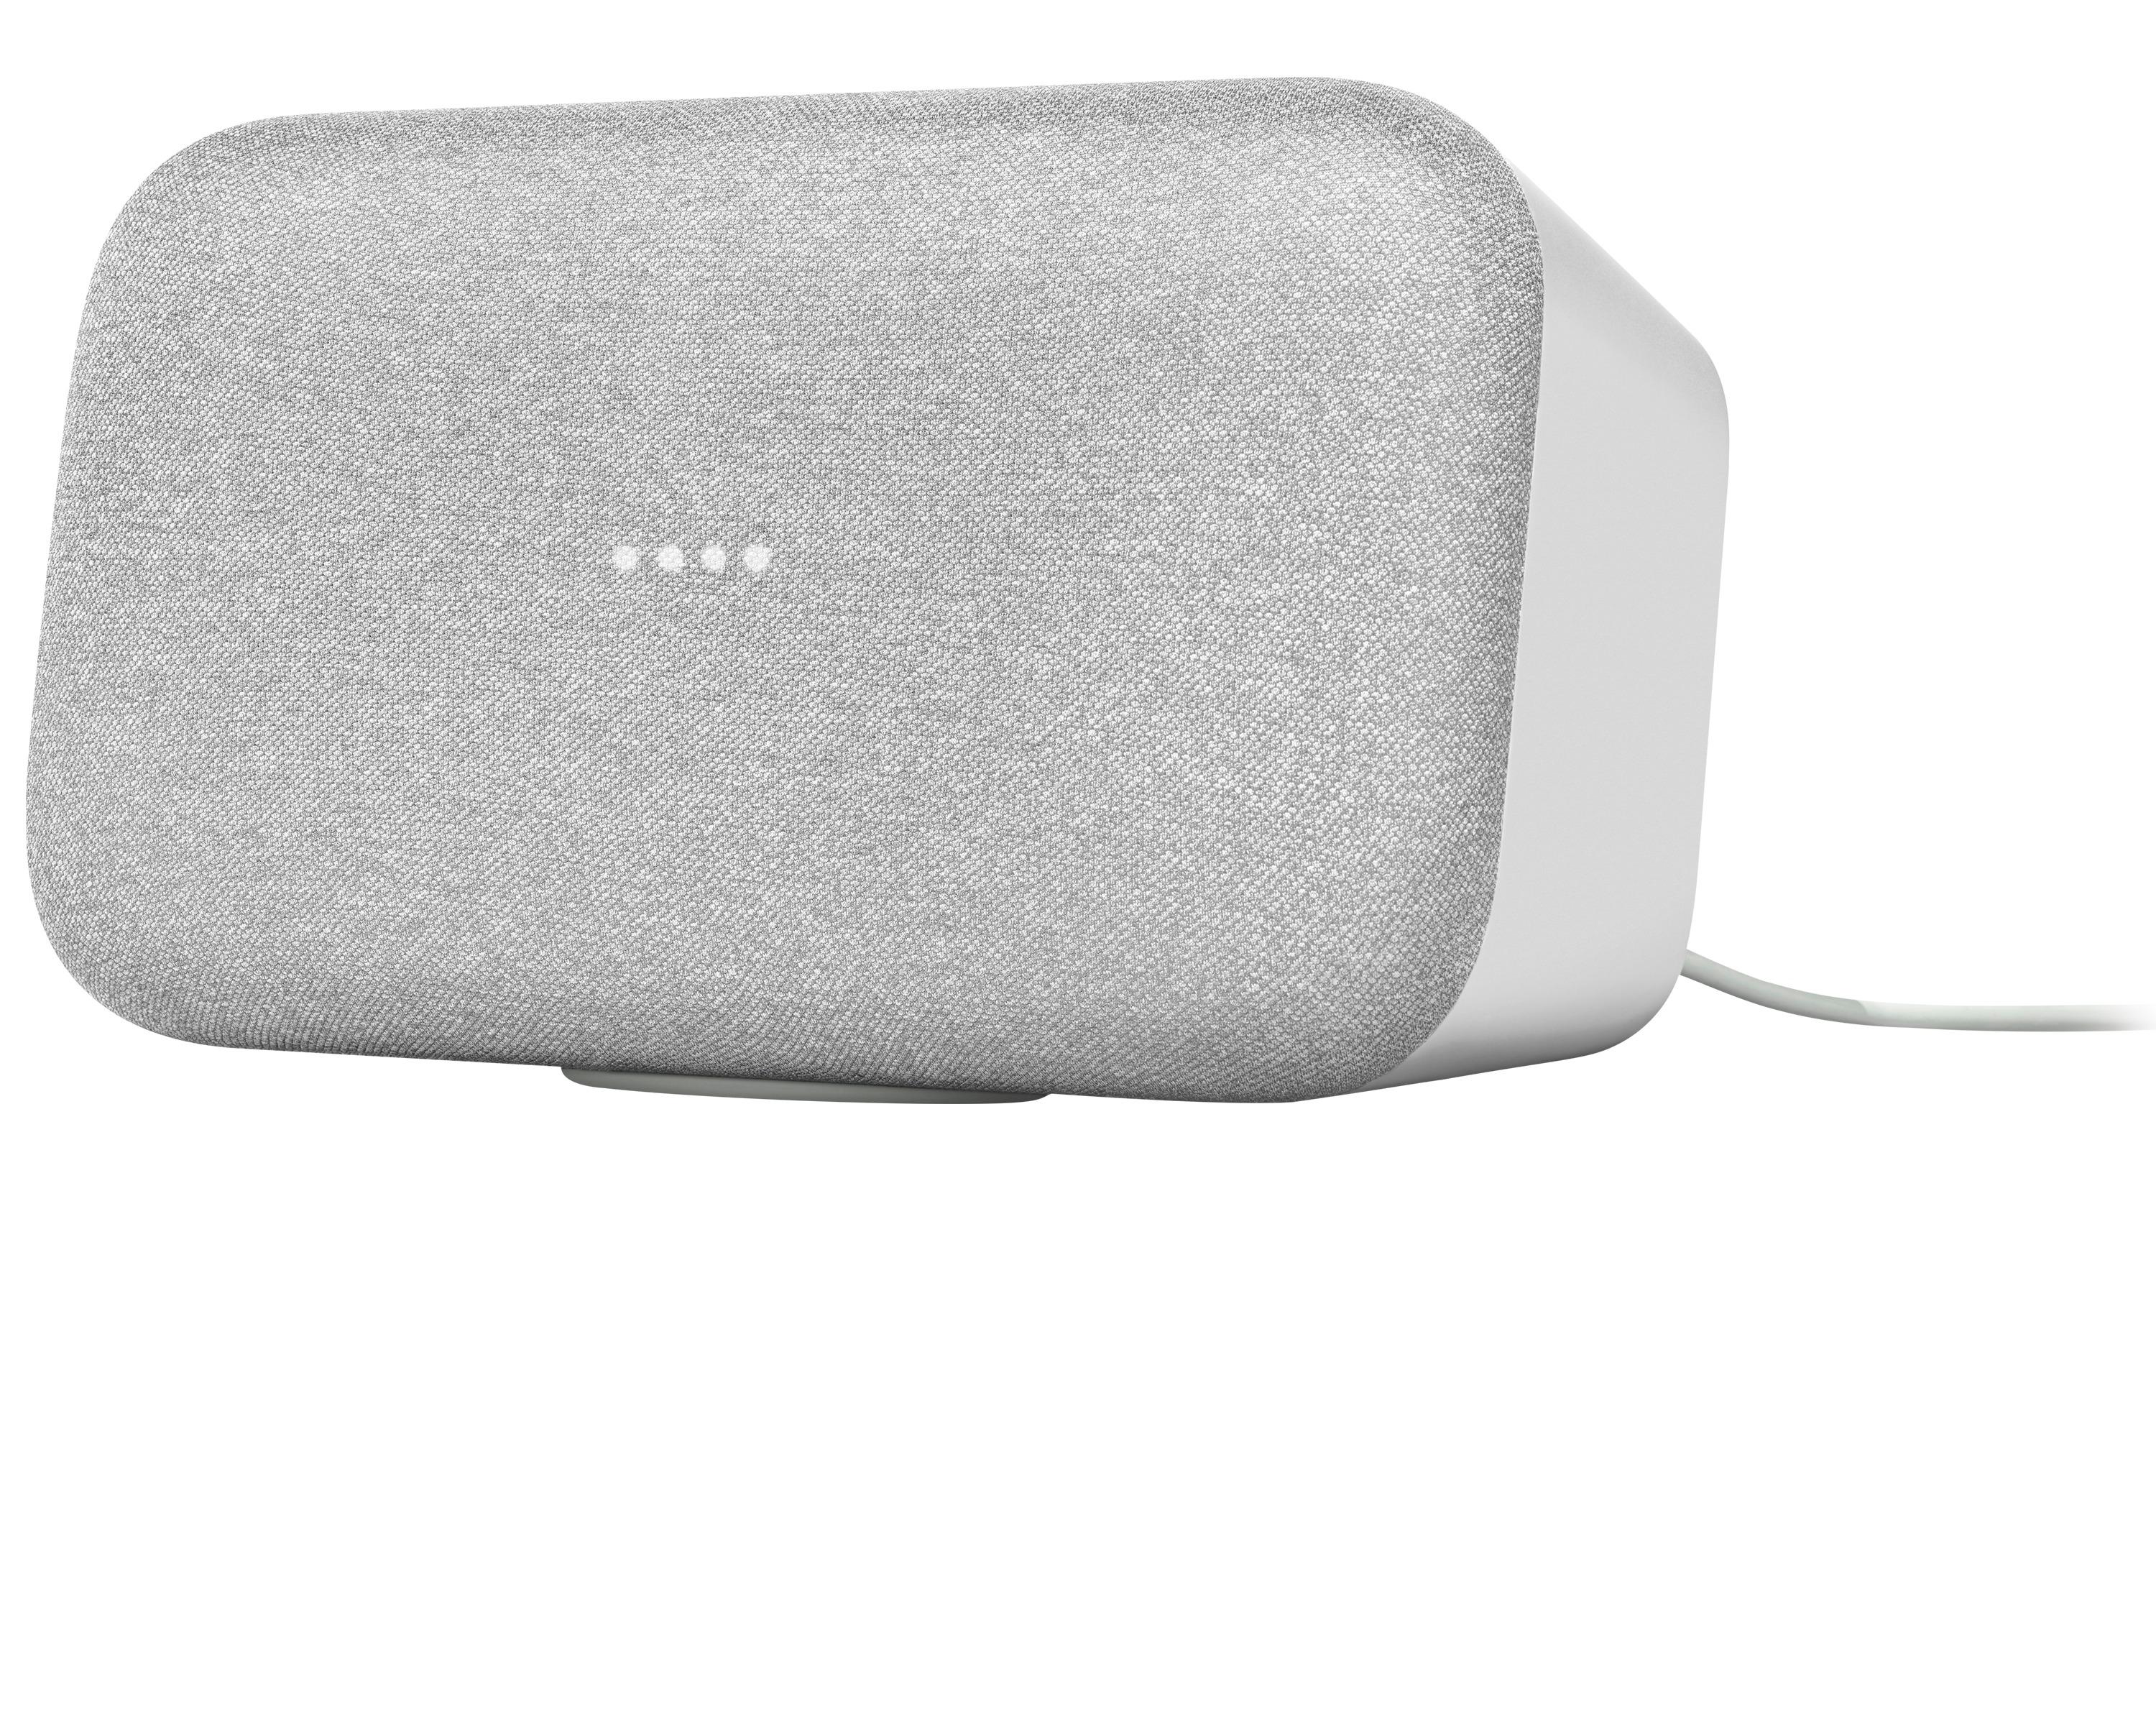 Google Home Max Smart Speaker with 